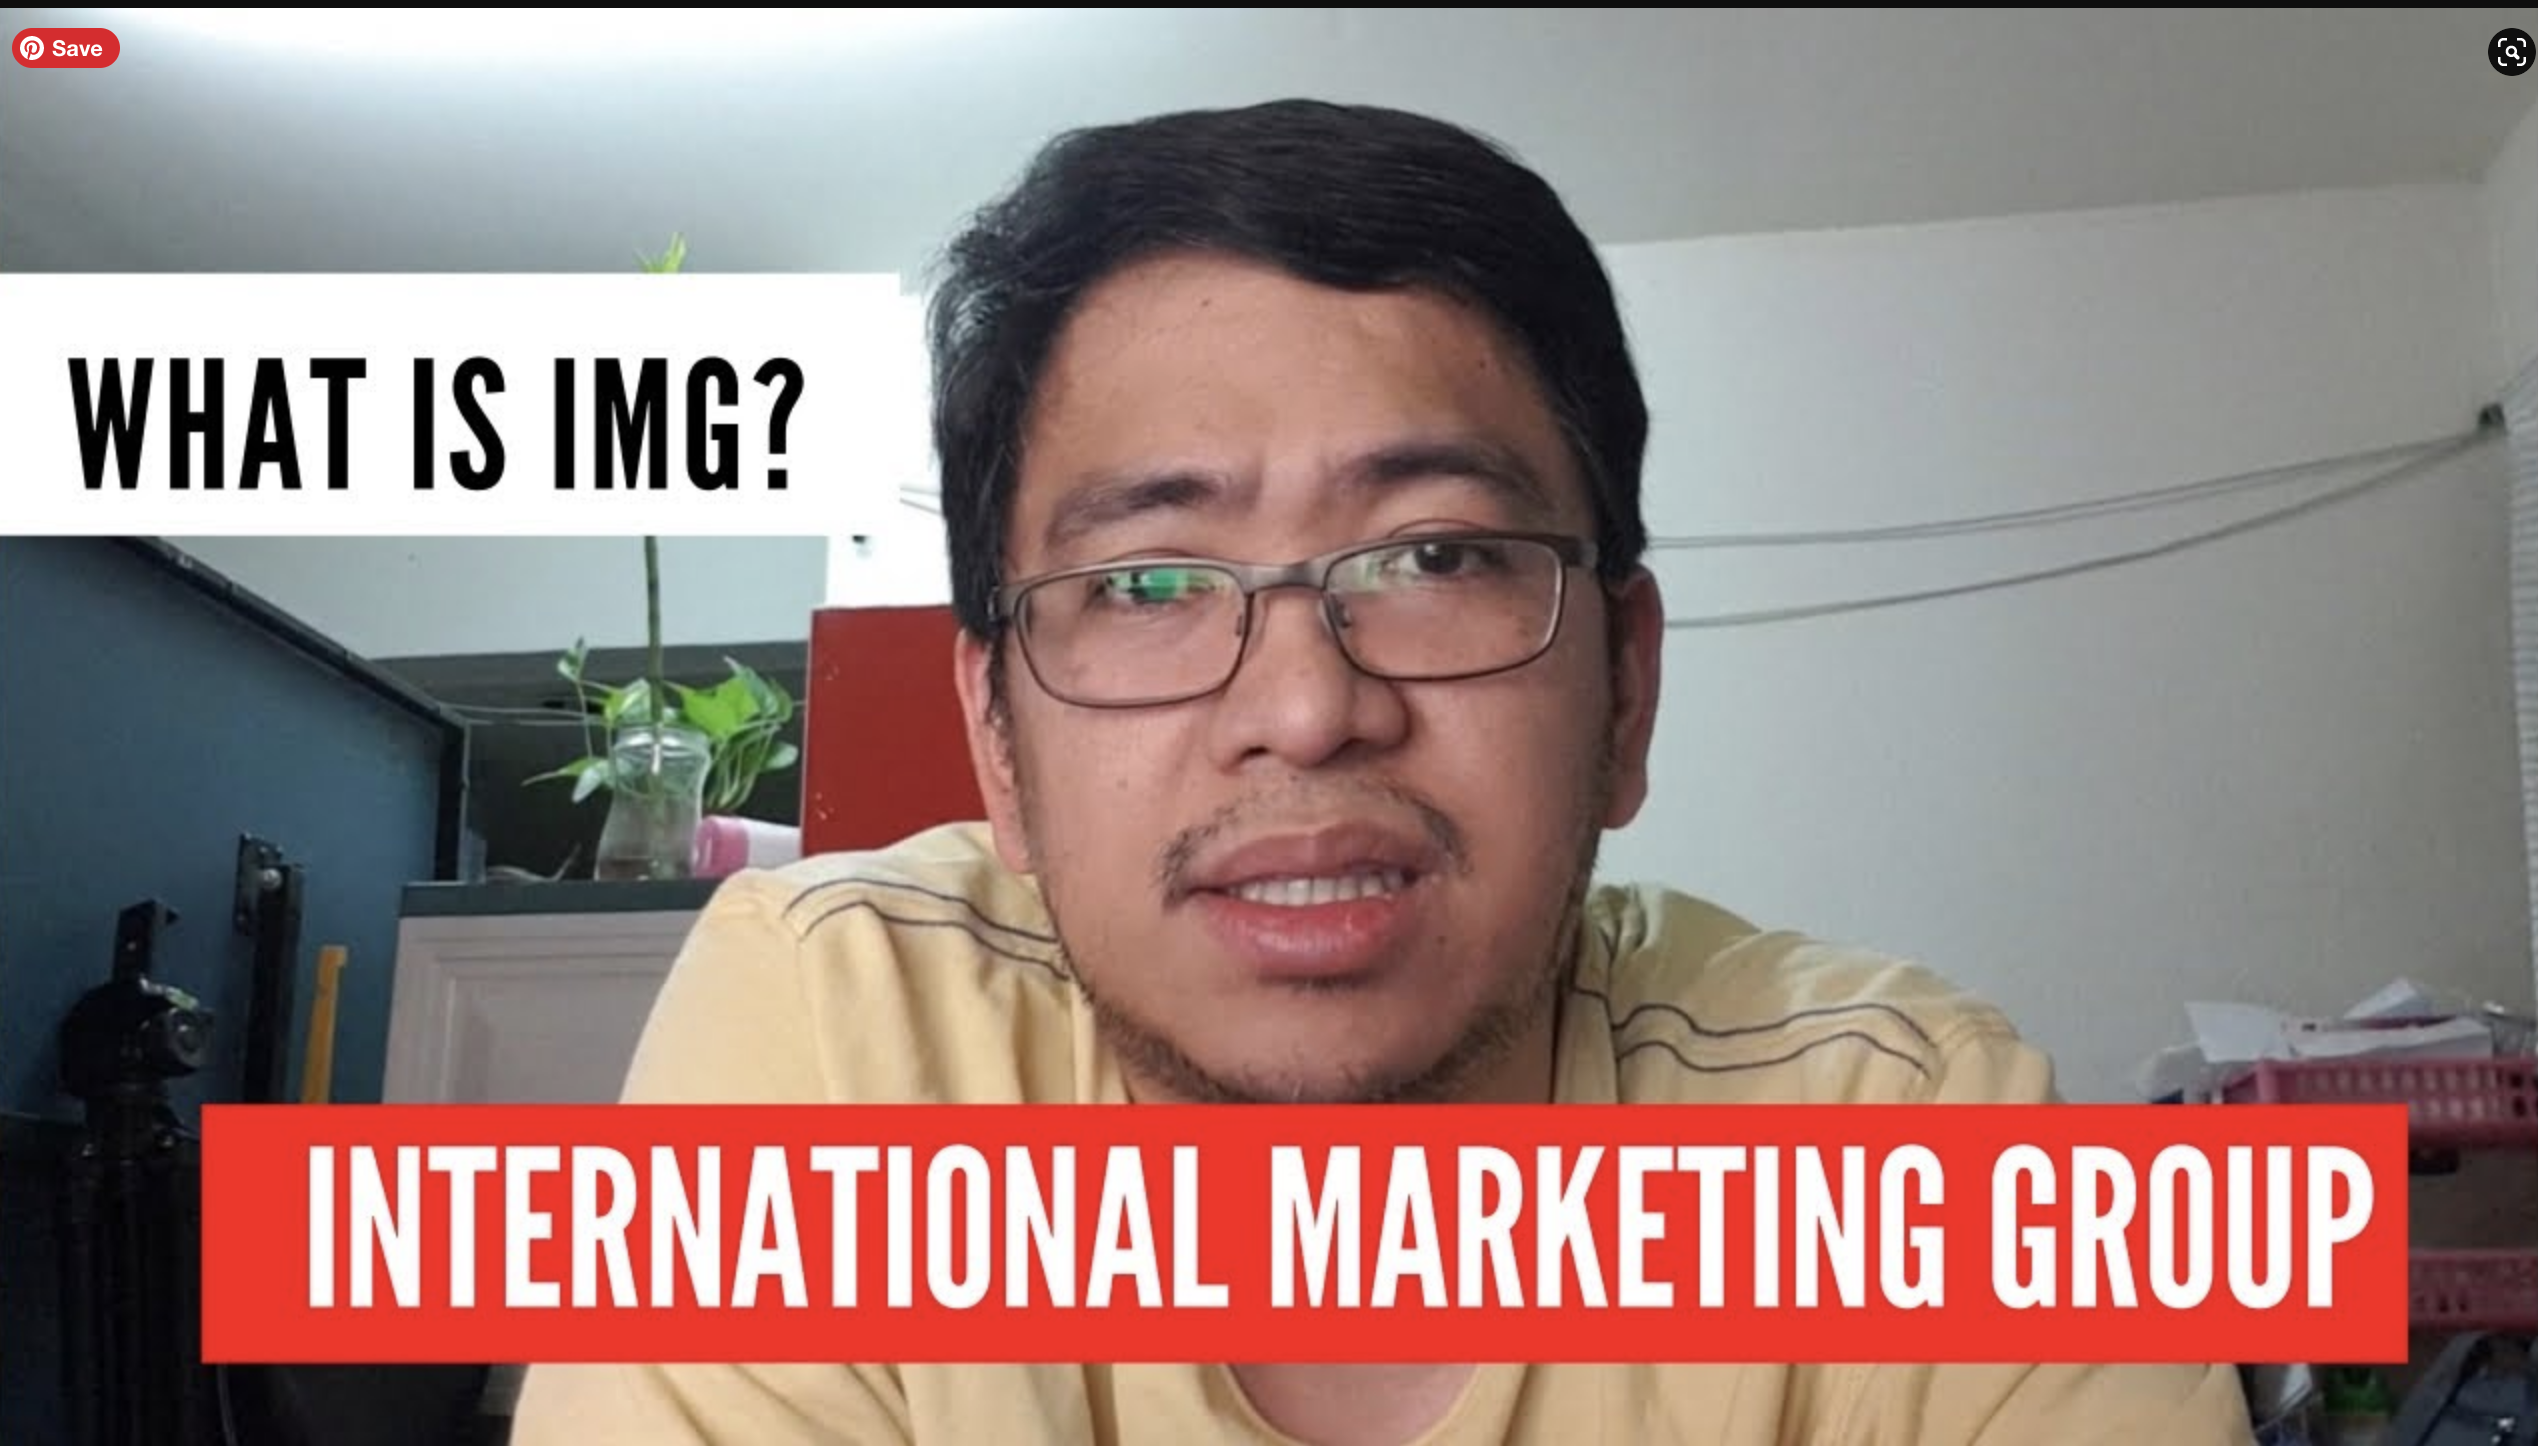 Am I an IMG Member and What is IMG (International Marketing Group)